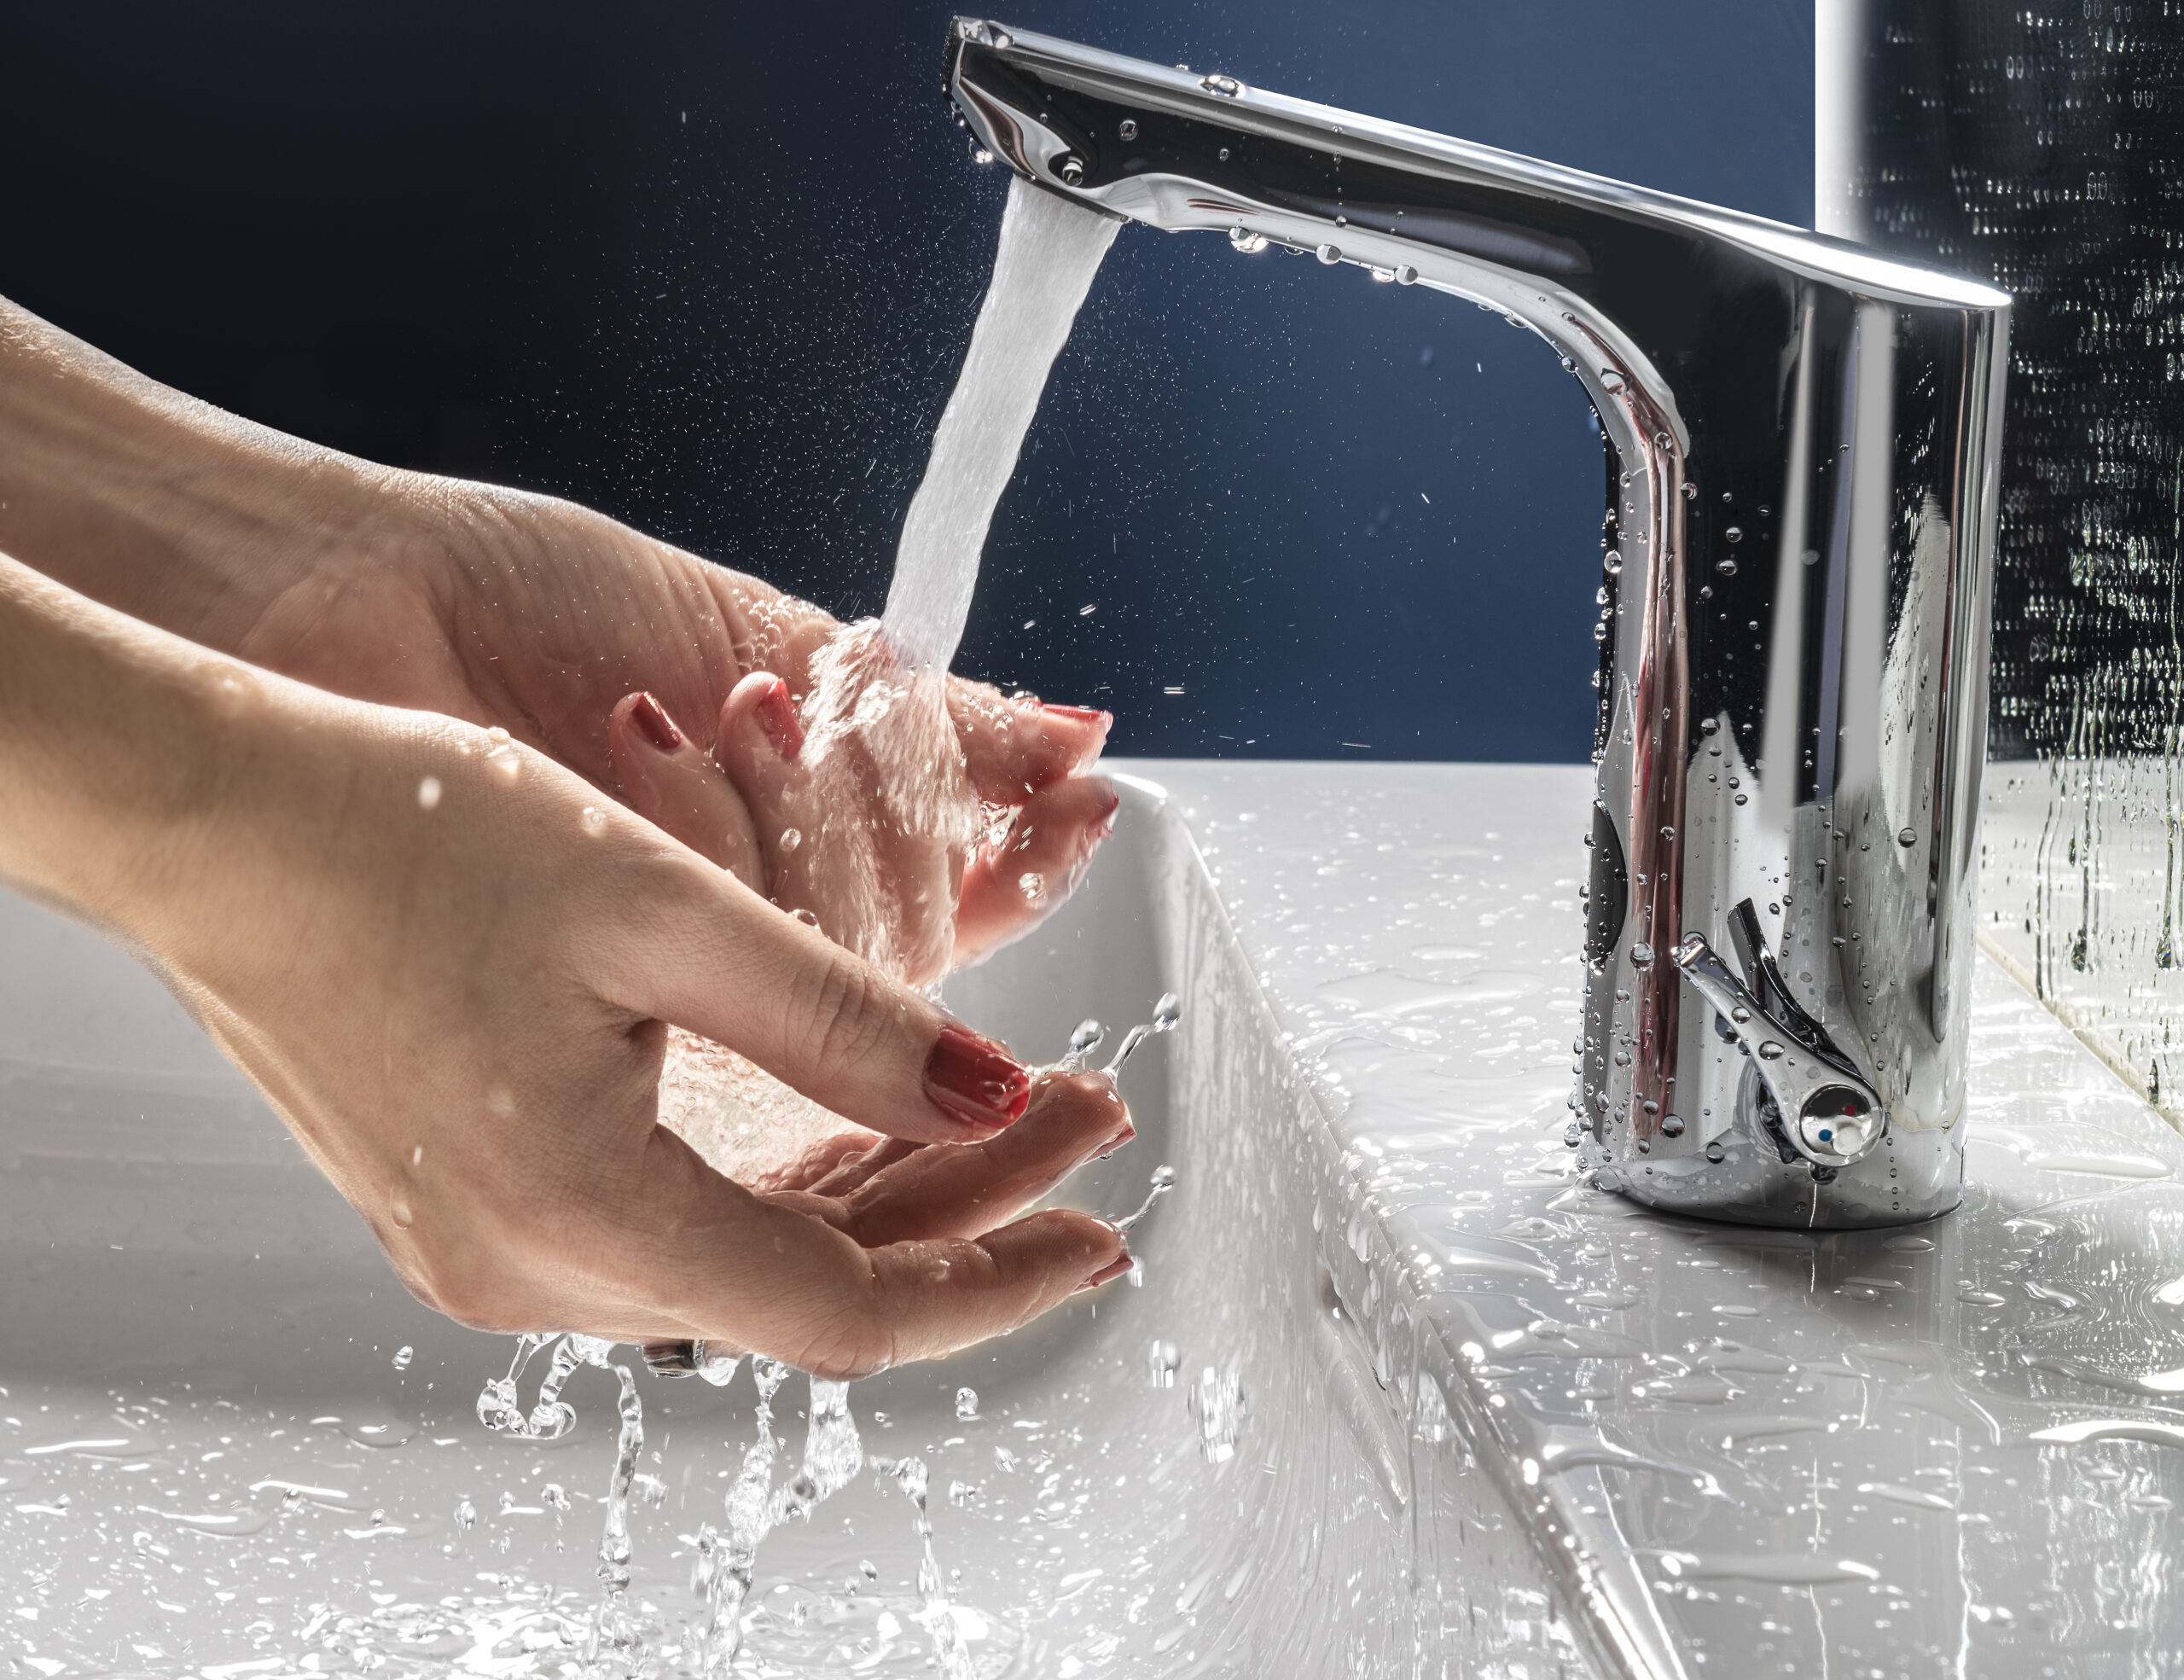 Can Touchless Faucets Save Water?